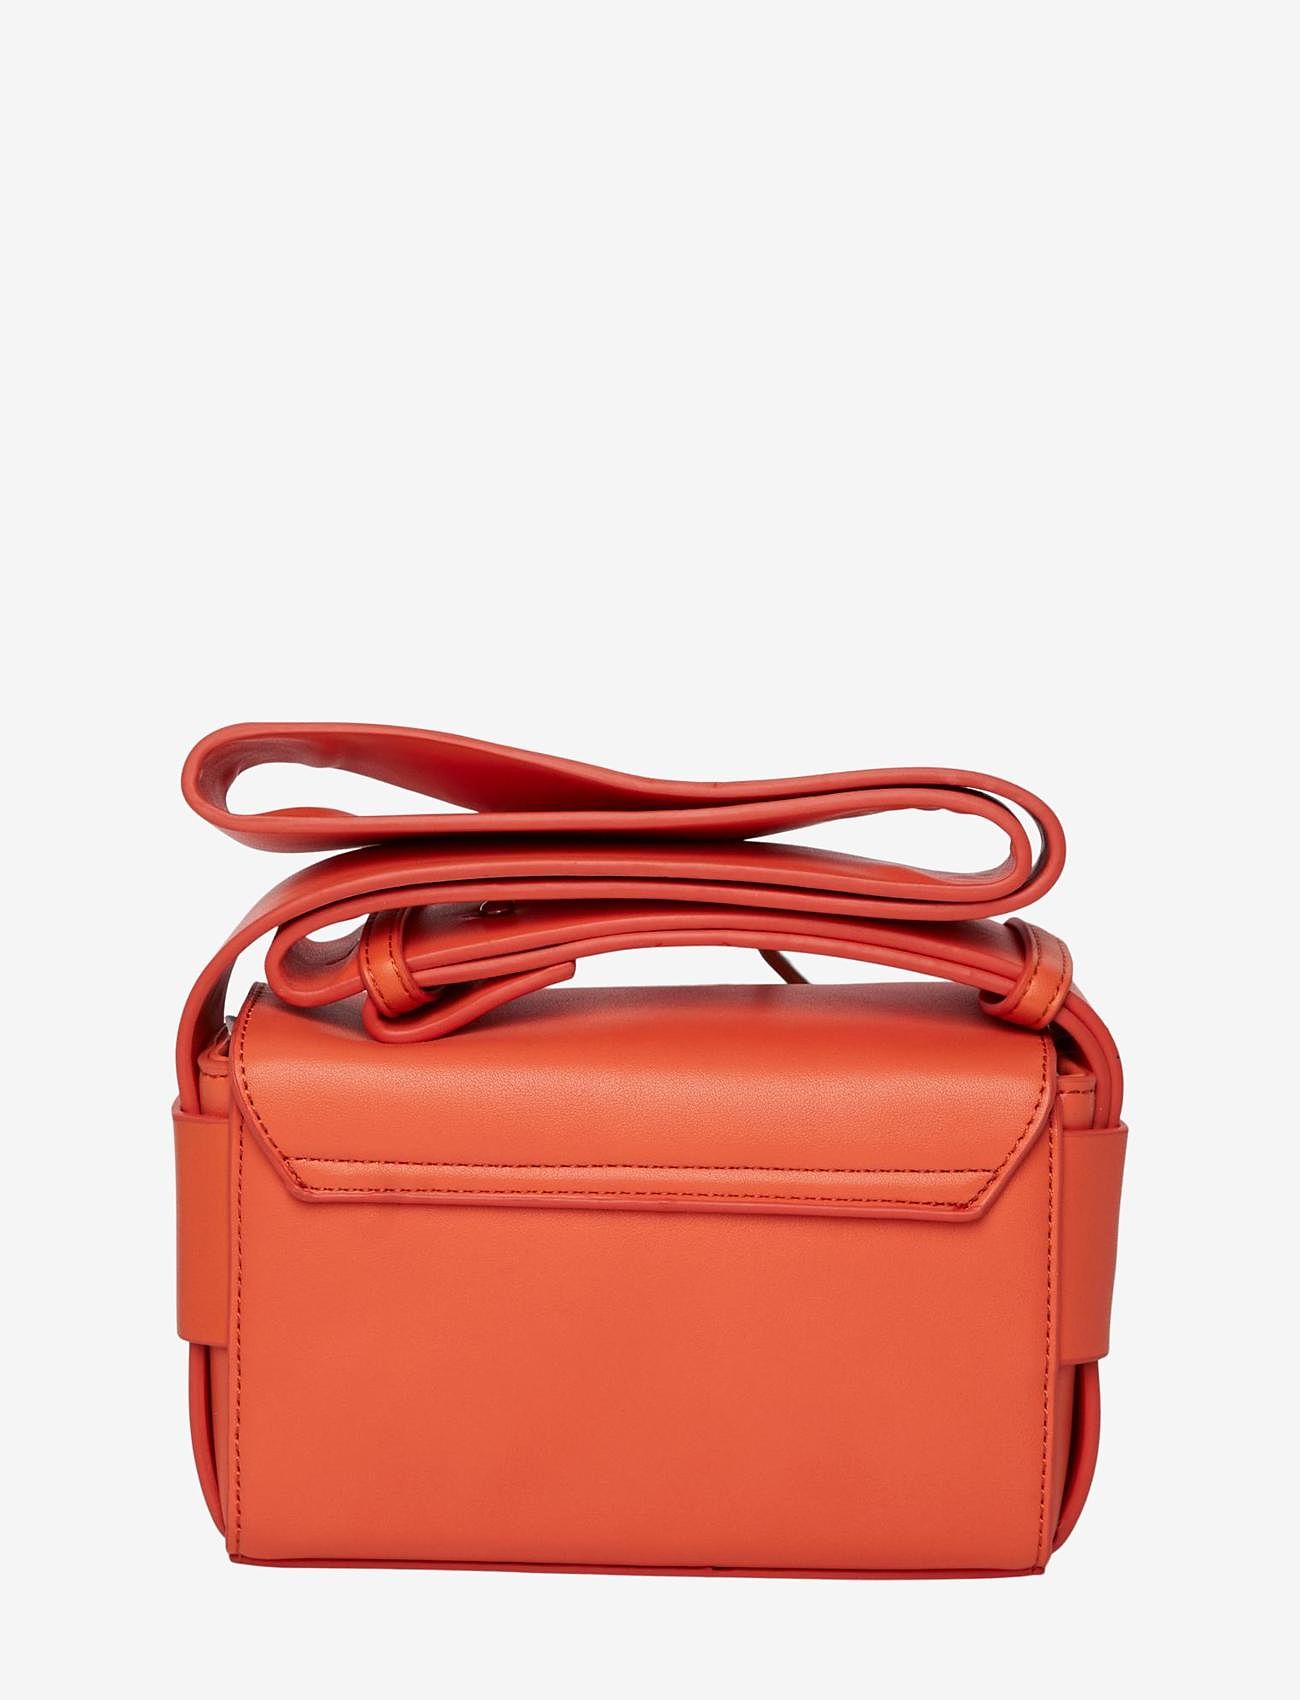 Pieces - PCLIMA CROSS BODY - birthday gifts - hot coral - 1